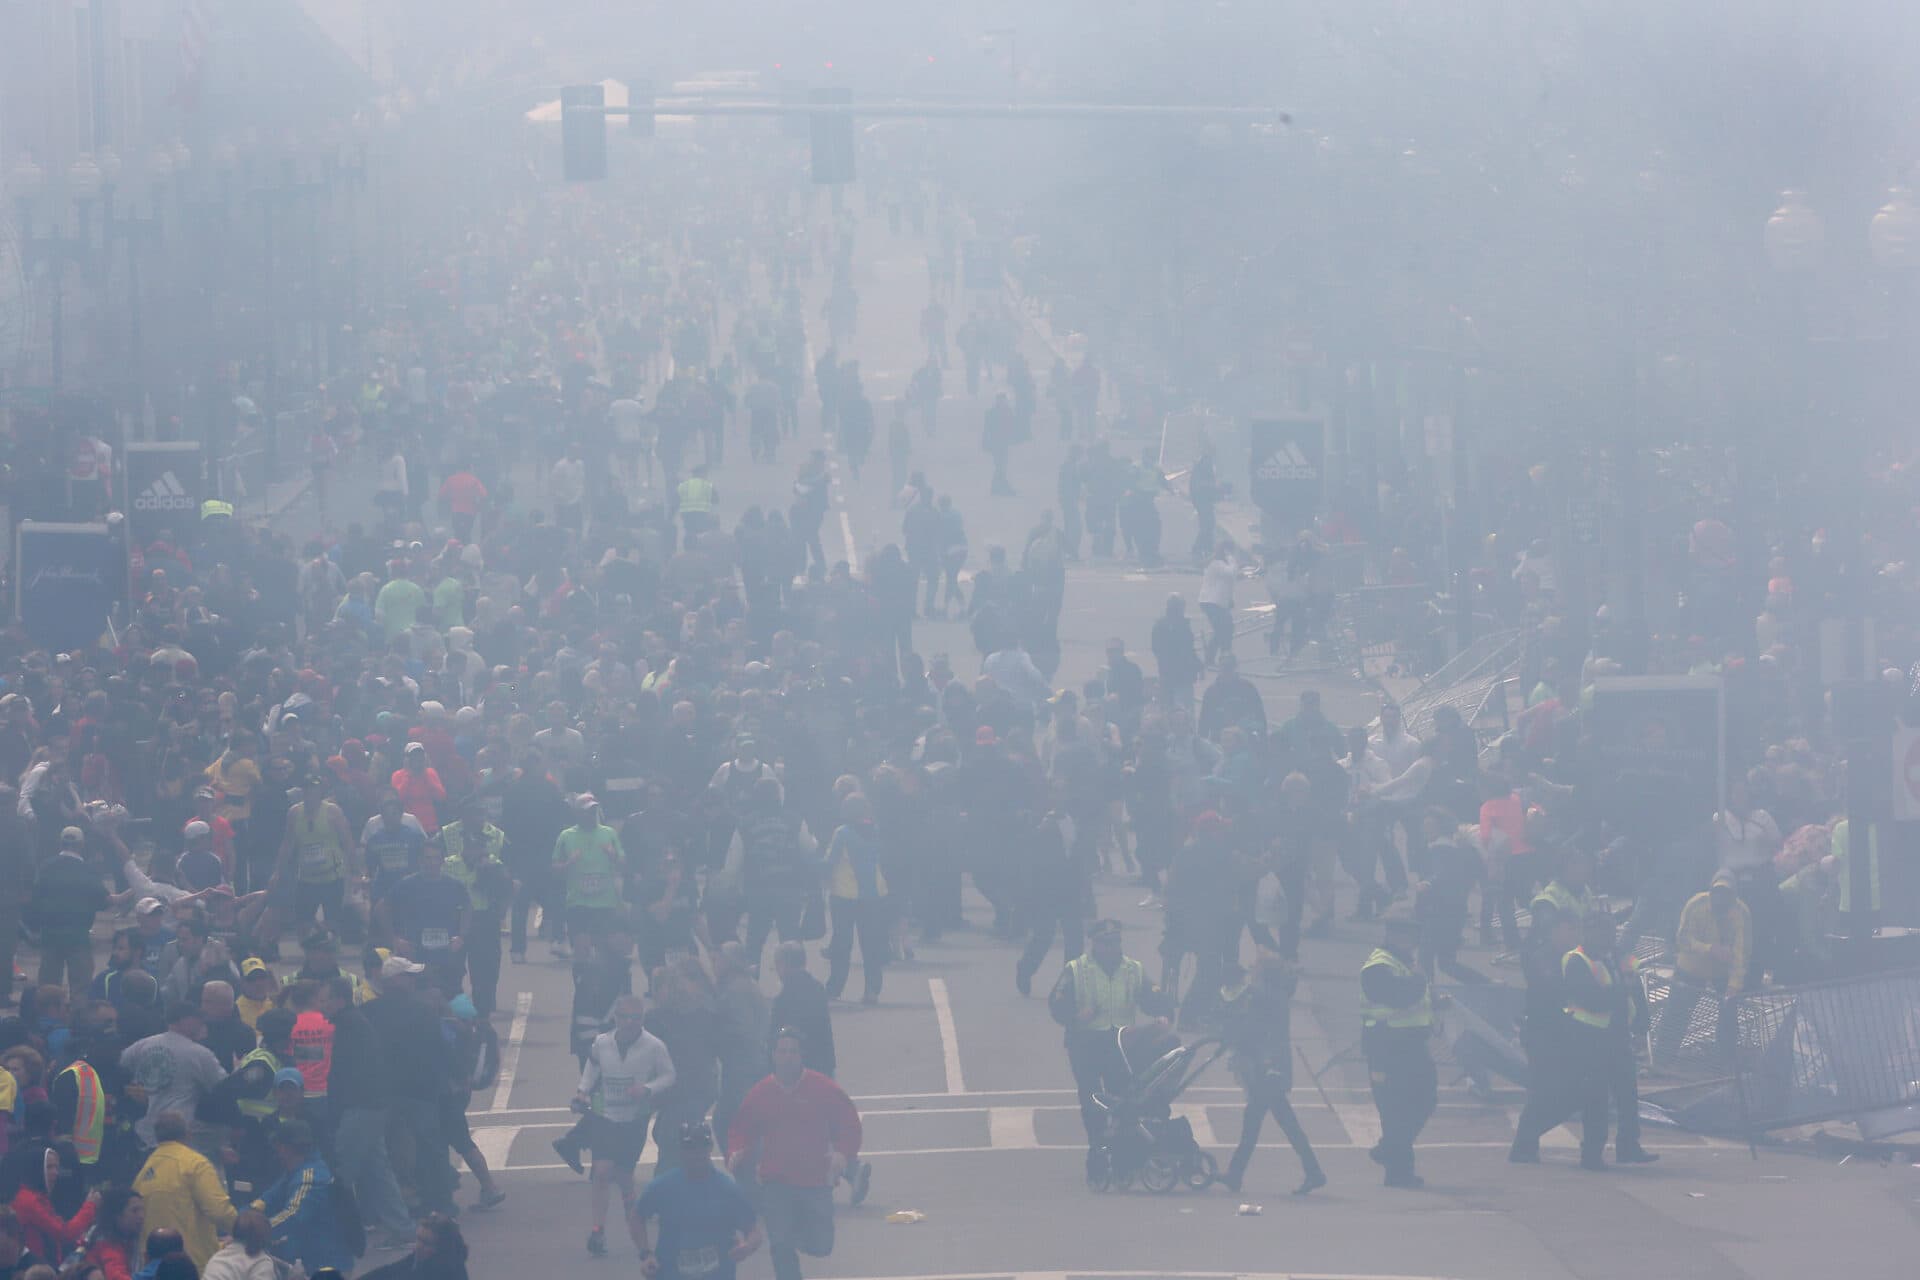 There was smoke and panic in the street as emergency personnel responded to two explosions near the finish line of the Boston Marathon in 2013. (David L. Ryan/The Boston Globe via Getty Images)